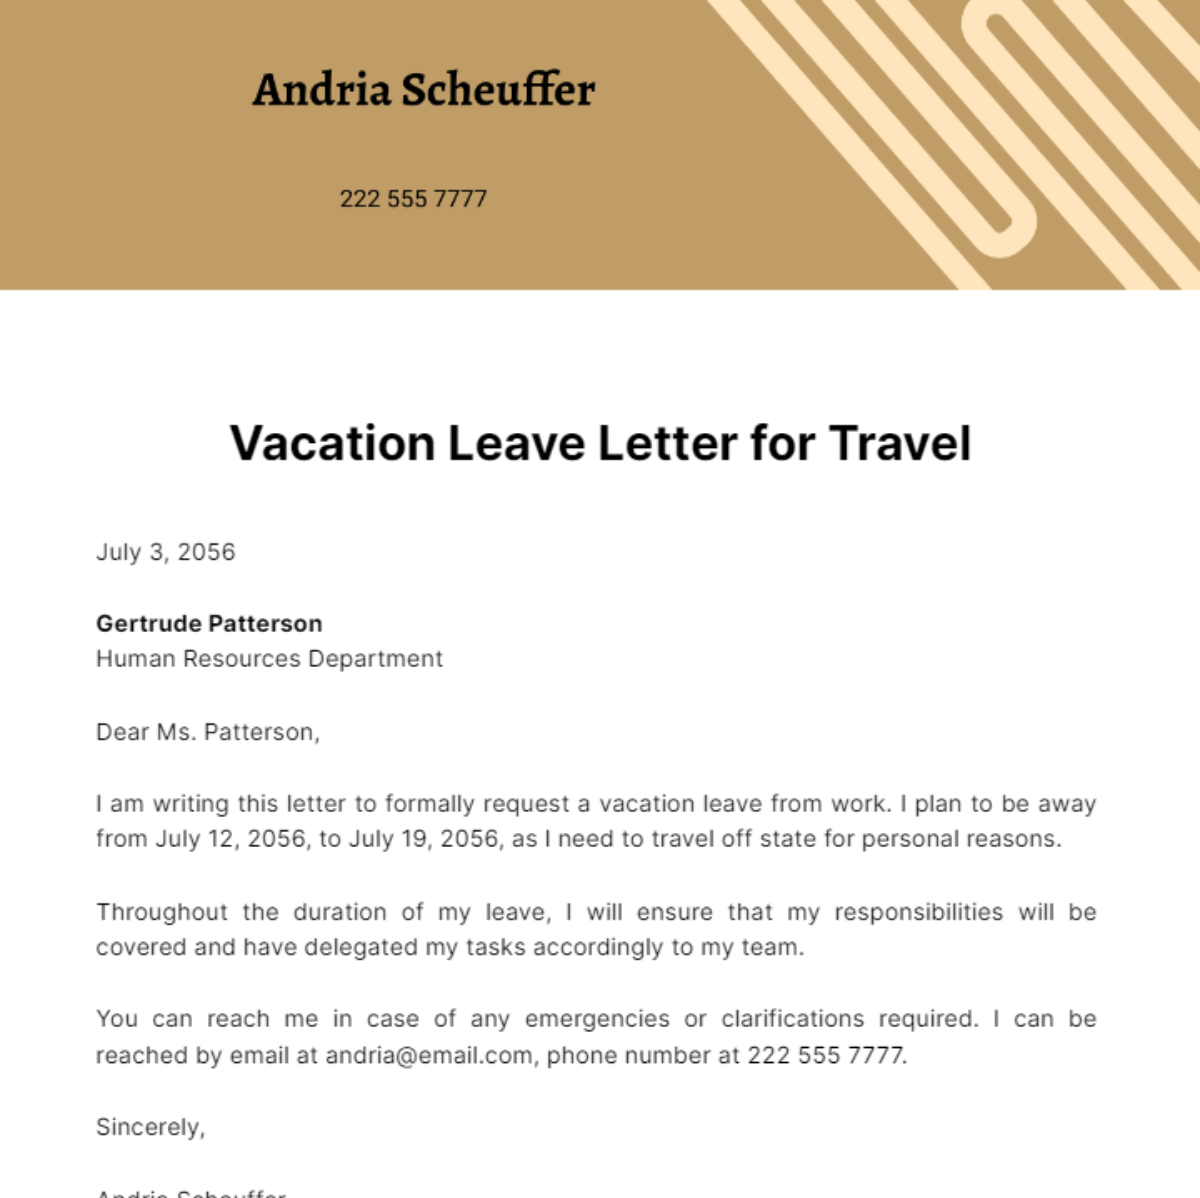 Vacation Leave Letter for Travel Template